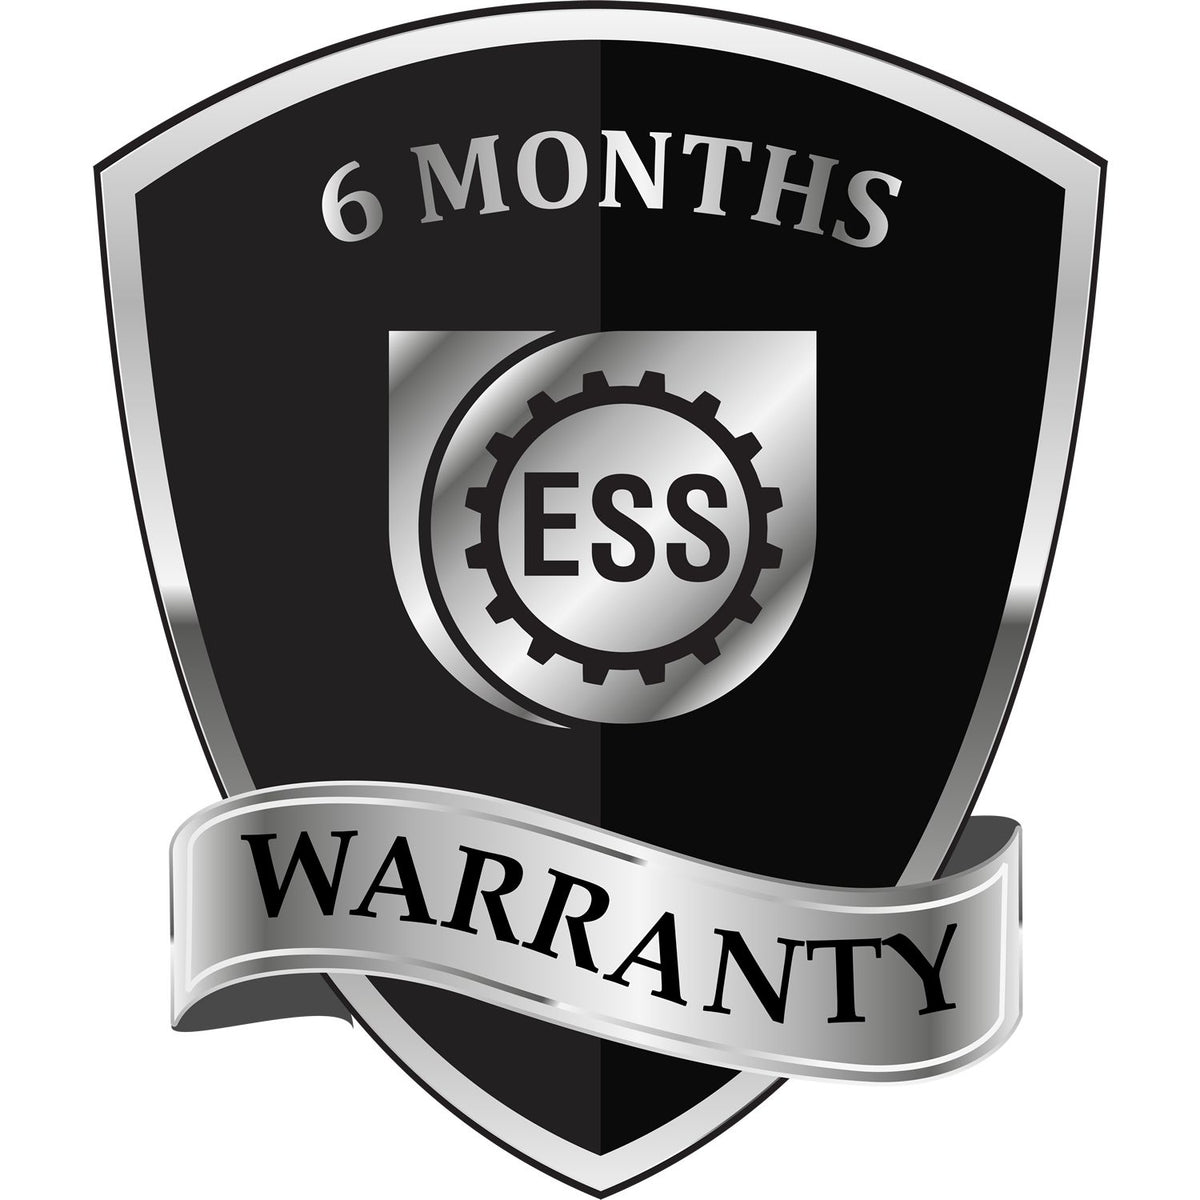 A badge or emblem showing a warranty icon for the Slim Pre-Inked Georgia Professional Engineer Seal Stamp